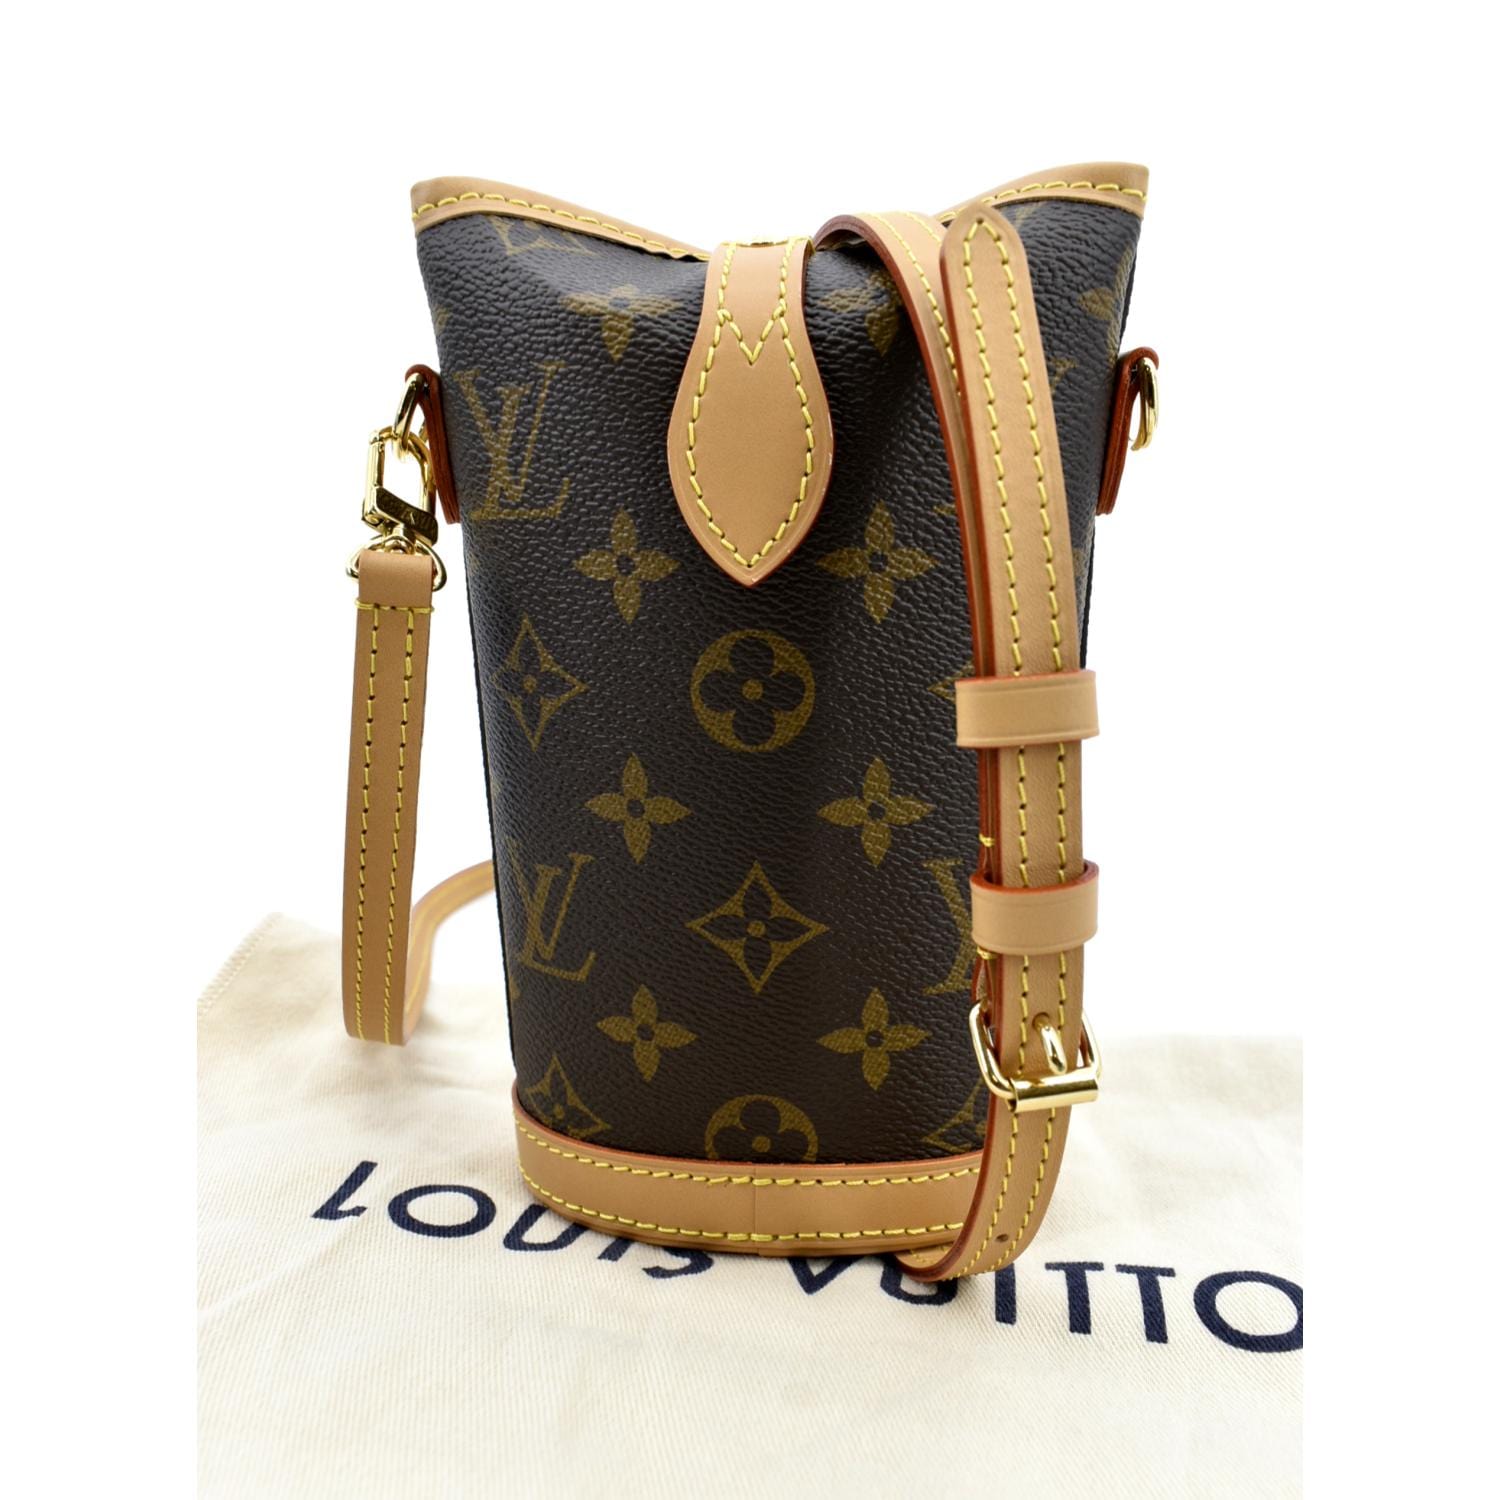 What Stores Sell Louis Vuitton Near Me